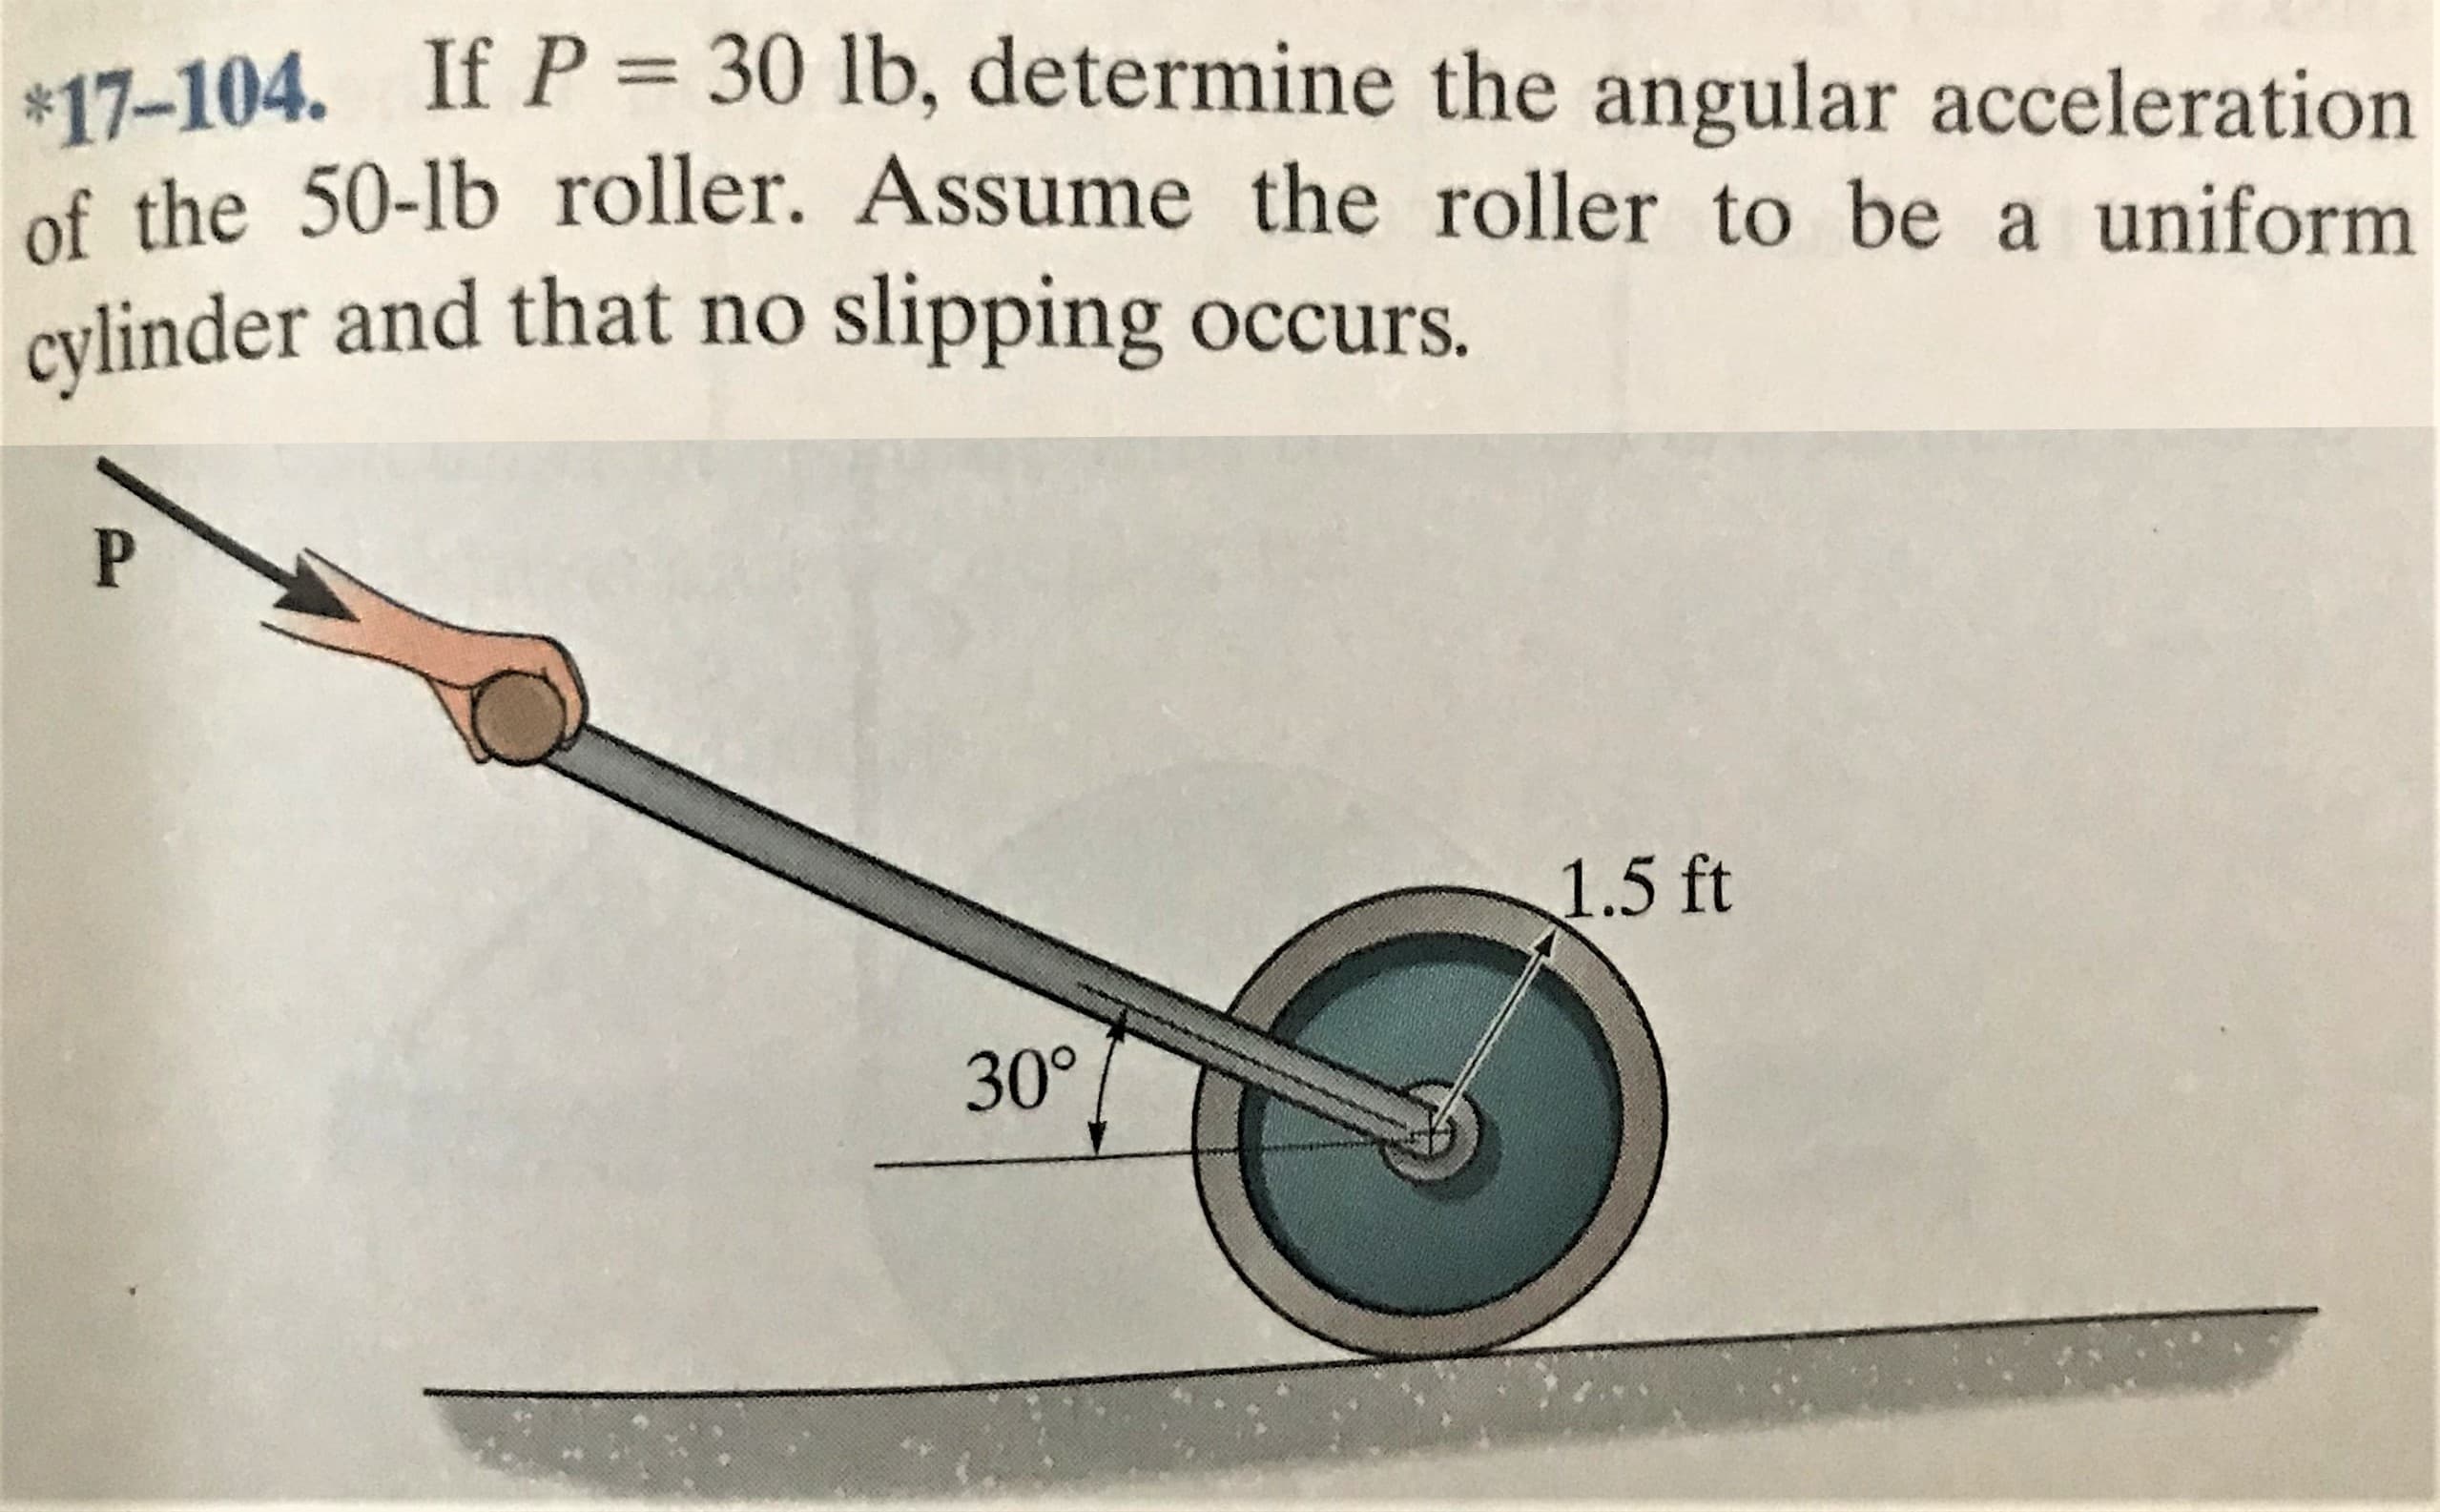 $17-104. If P = 30 lb, determine the angular acceleration
of the 50-lb roller. Assume the roller to be a uniform
cylinder and that no slipping occurs.
1.5 ft
30°
